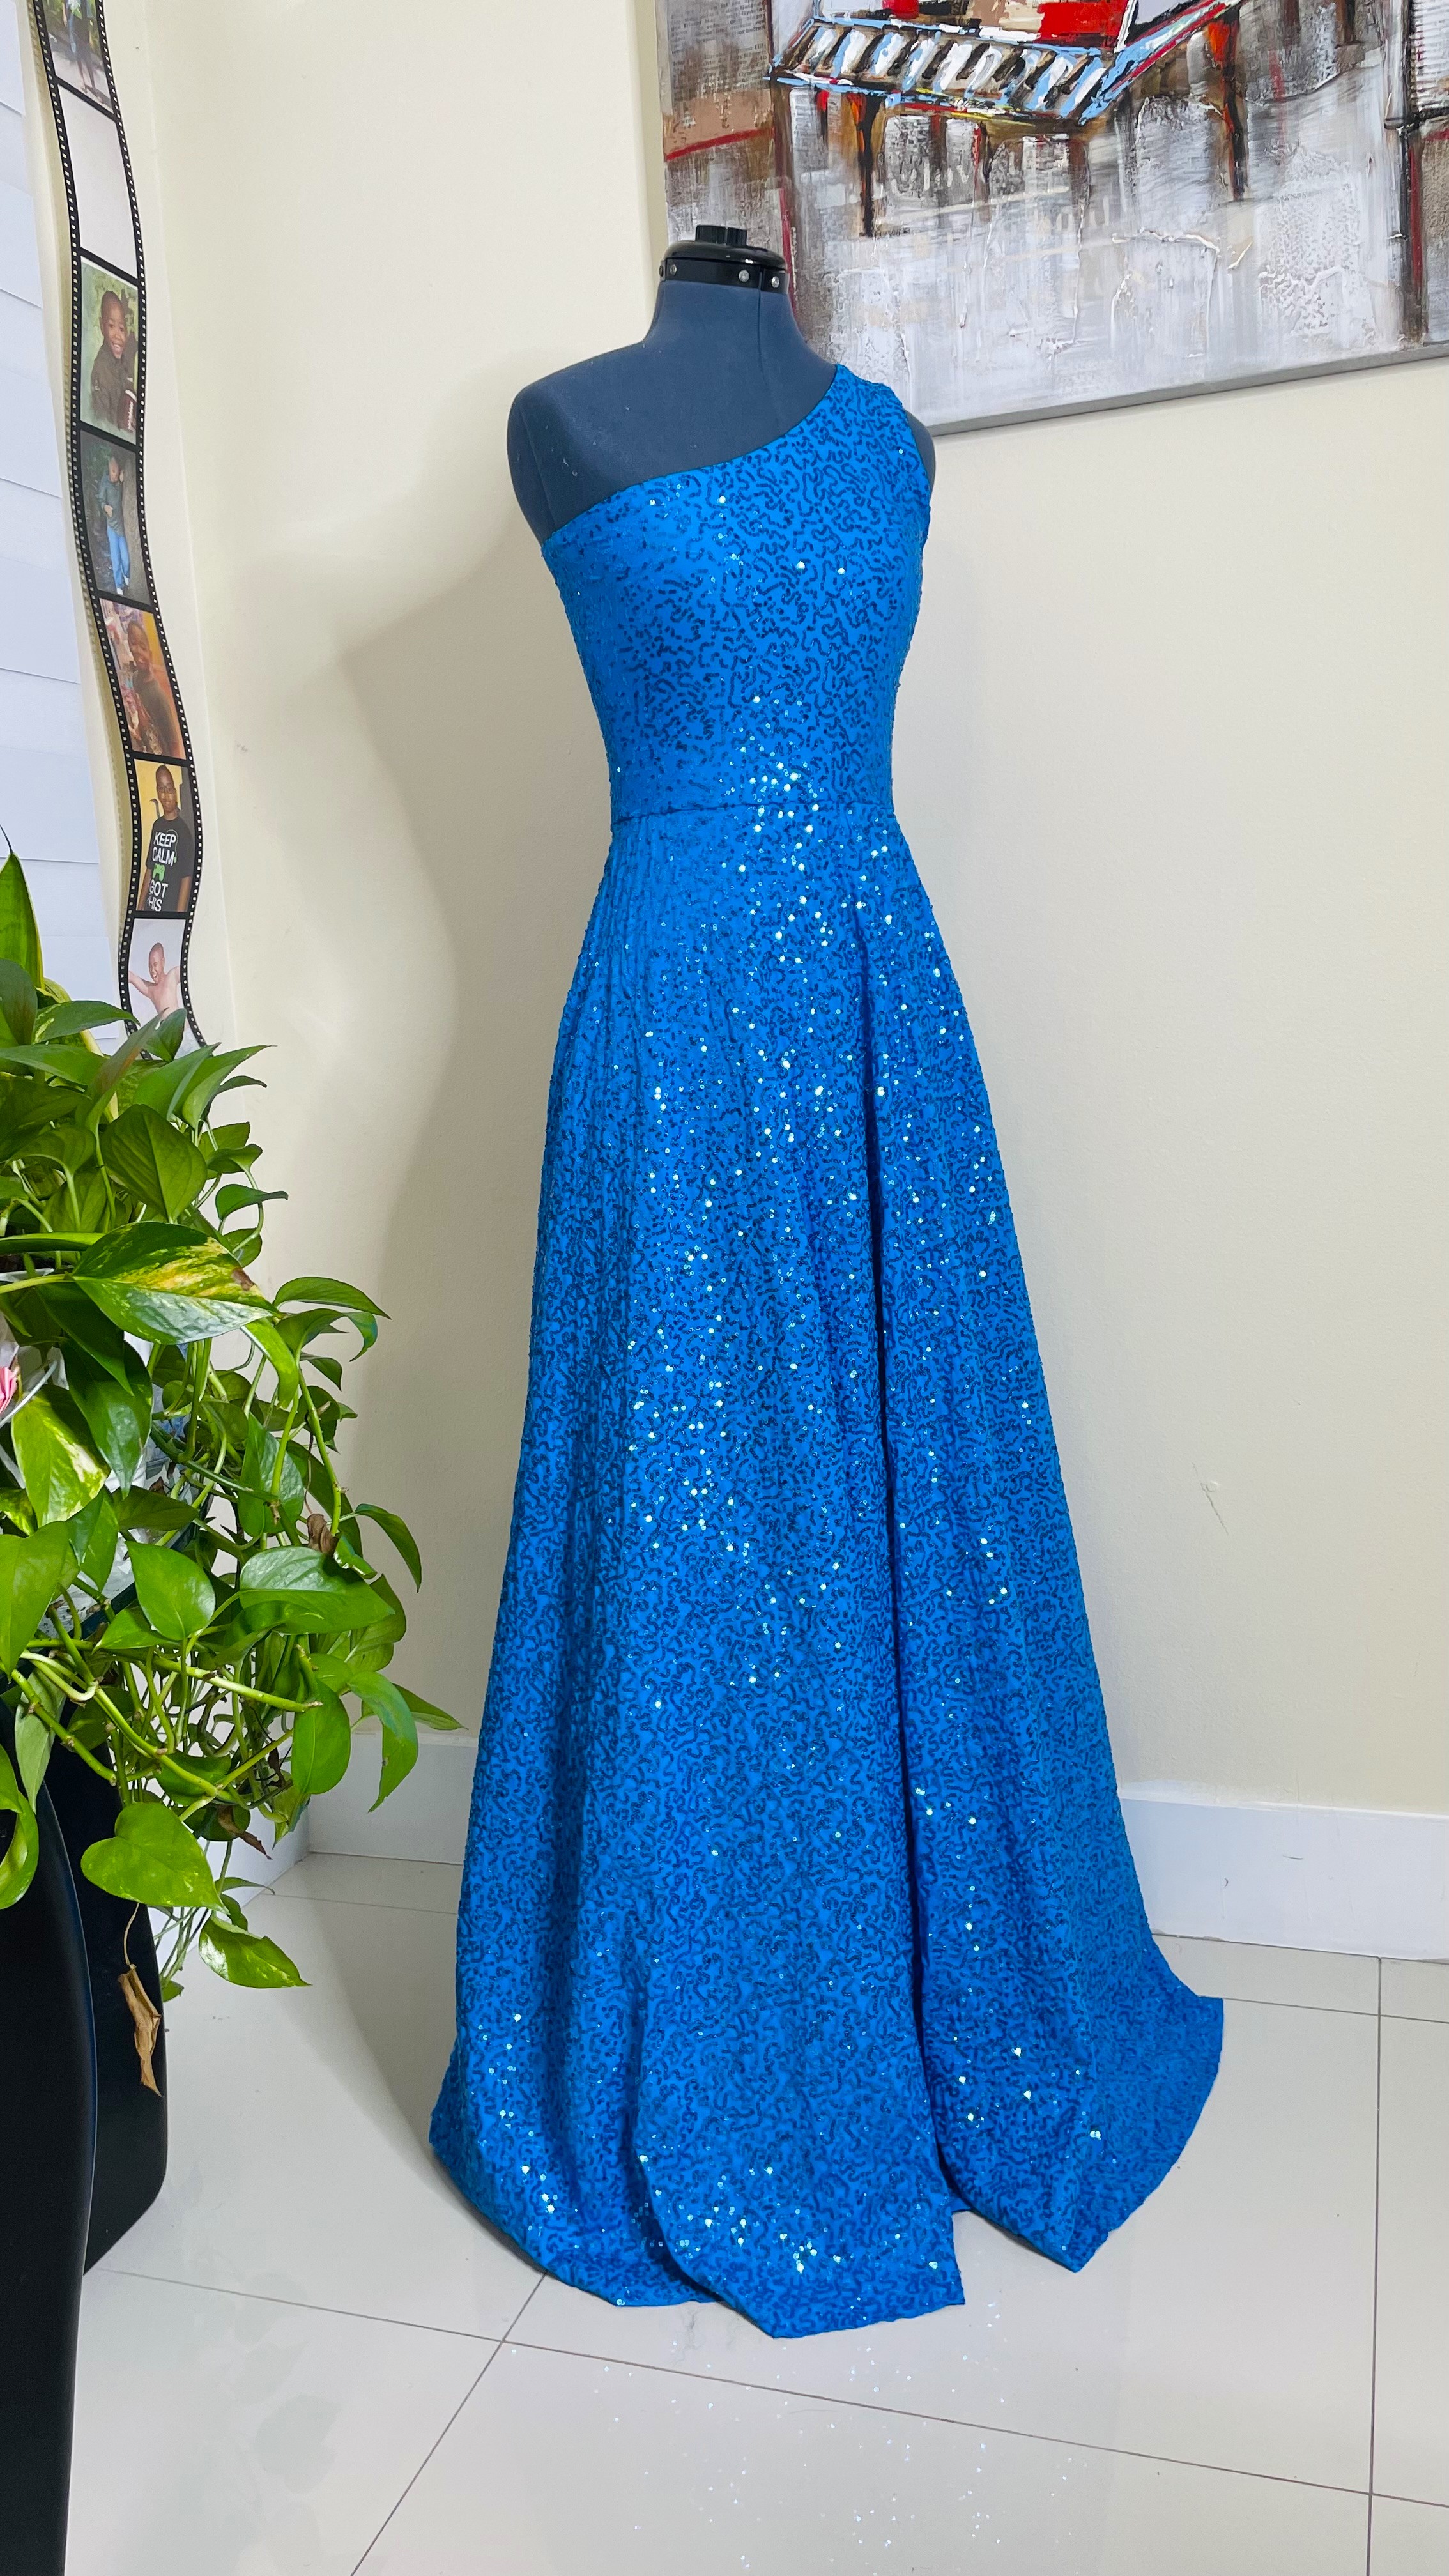 Made By A Fabricista: A Mother's Day Gift - Making my Daughter's Prom Dress